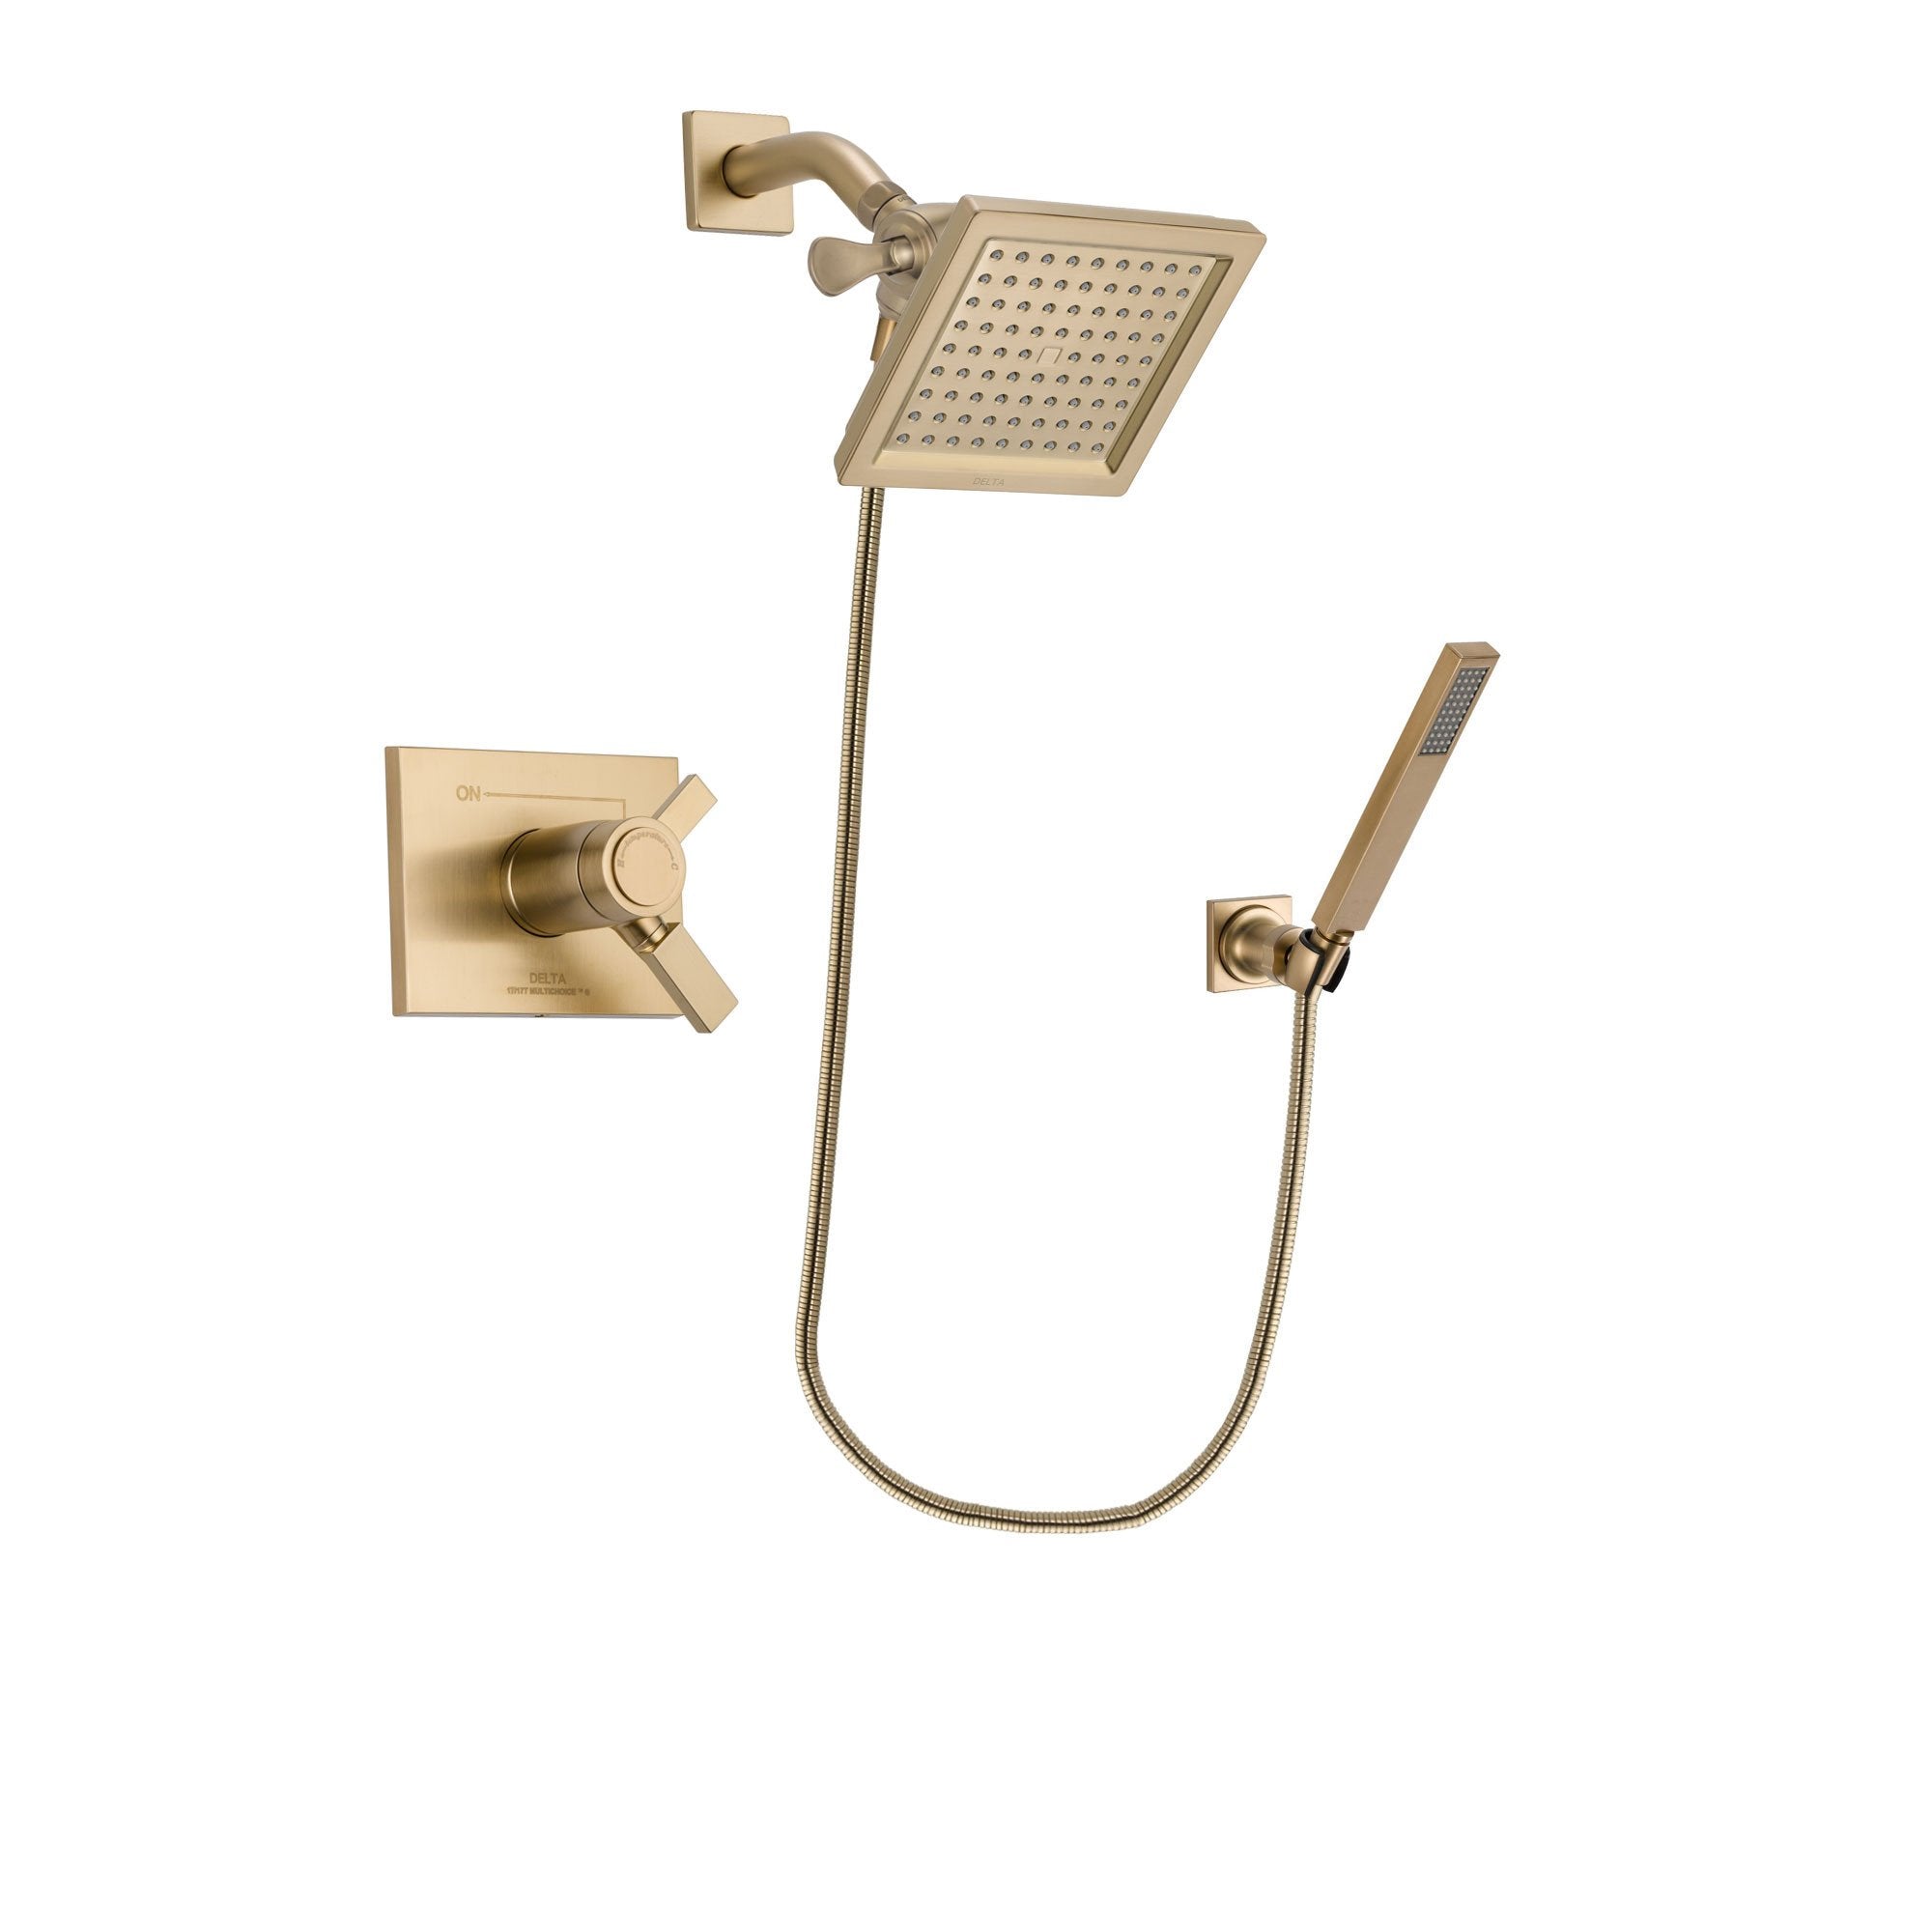 Delta Vero Champagne Bronze Finish Thermostatic Shower Faucet System Package with 6.5-inch Square Rain Showerhead and Modern Wall-Mount Handheld Shower Stick Includes Rough-in Valve DSP3888V